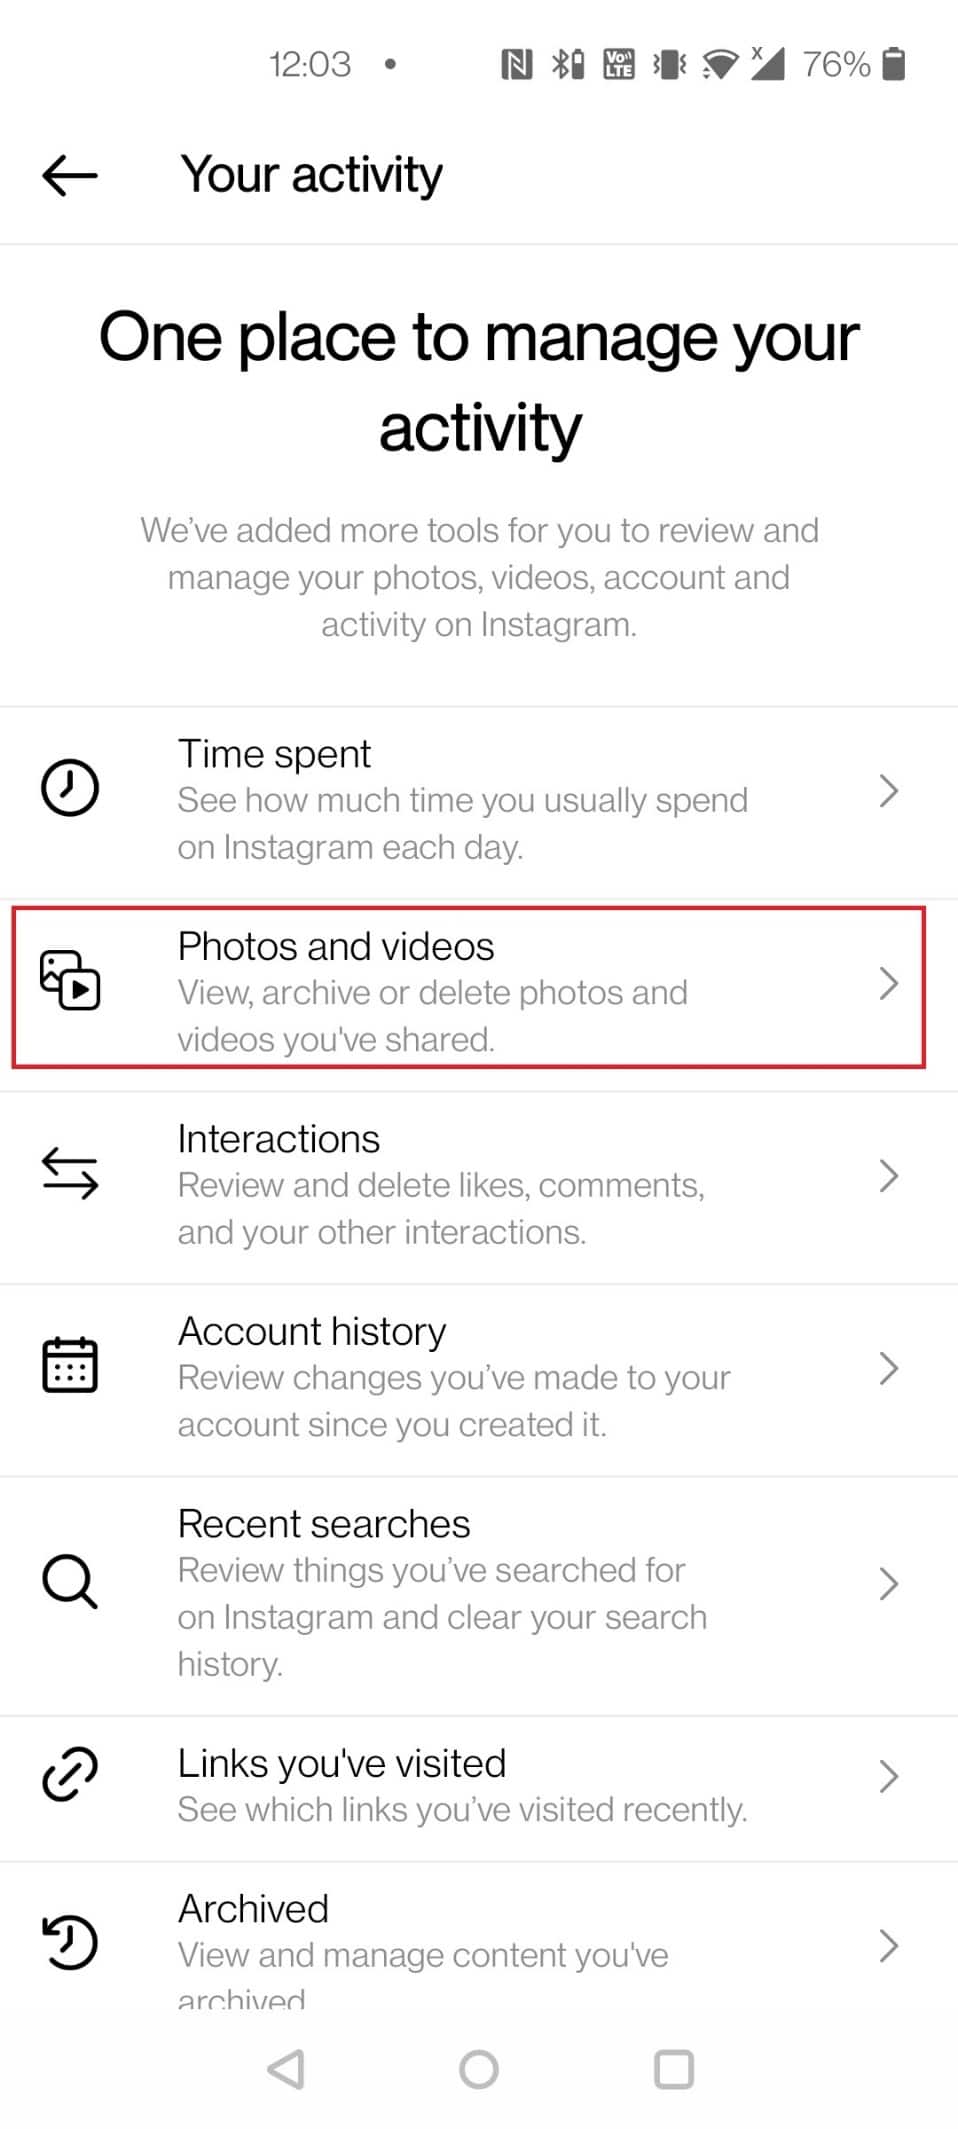 Tap on Photos and videos